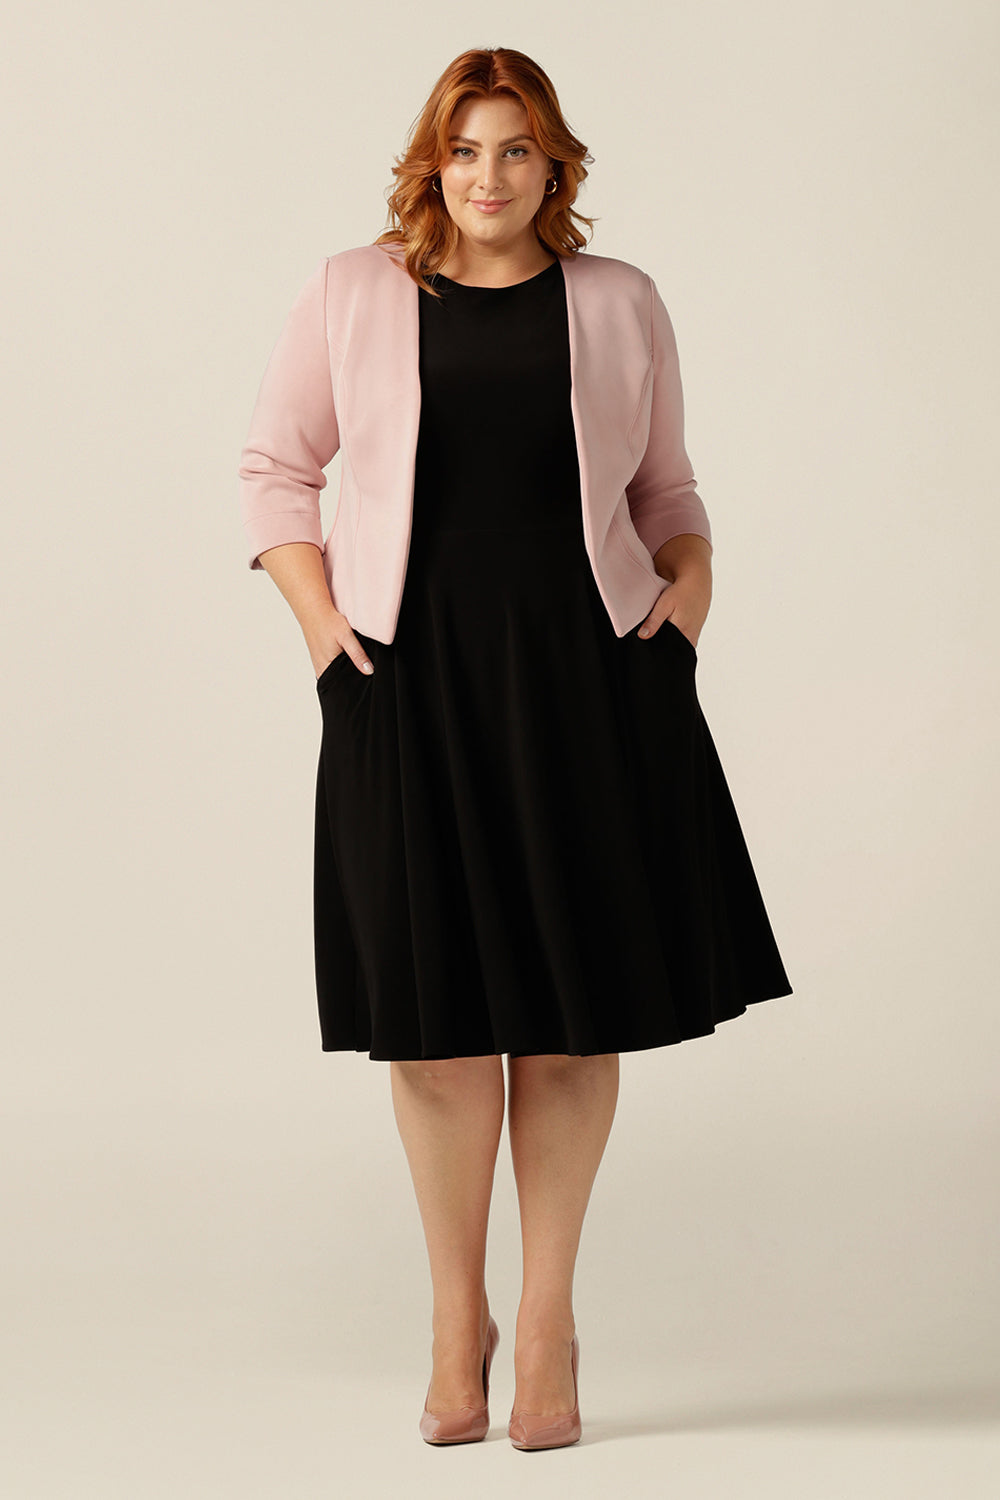 a size 18, plus size woman wears a collarless, open-front pink jacket with 3/4 sleeves. Made in Australia from stretch modal, a sustainable natural fibre, this is an eco-conscious quality corporate jacket. The sustainably-produced women's jacket is style with a black jersey dress for classic smart work style.